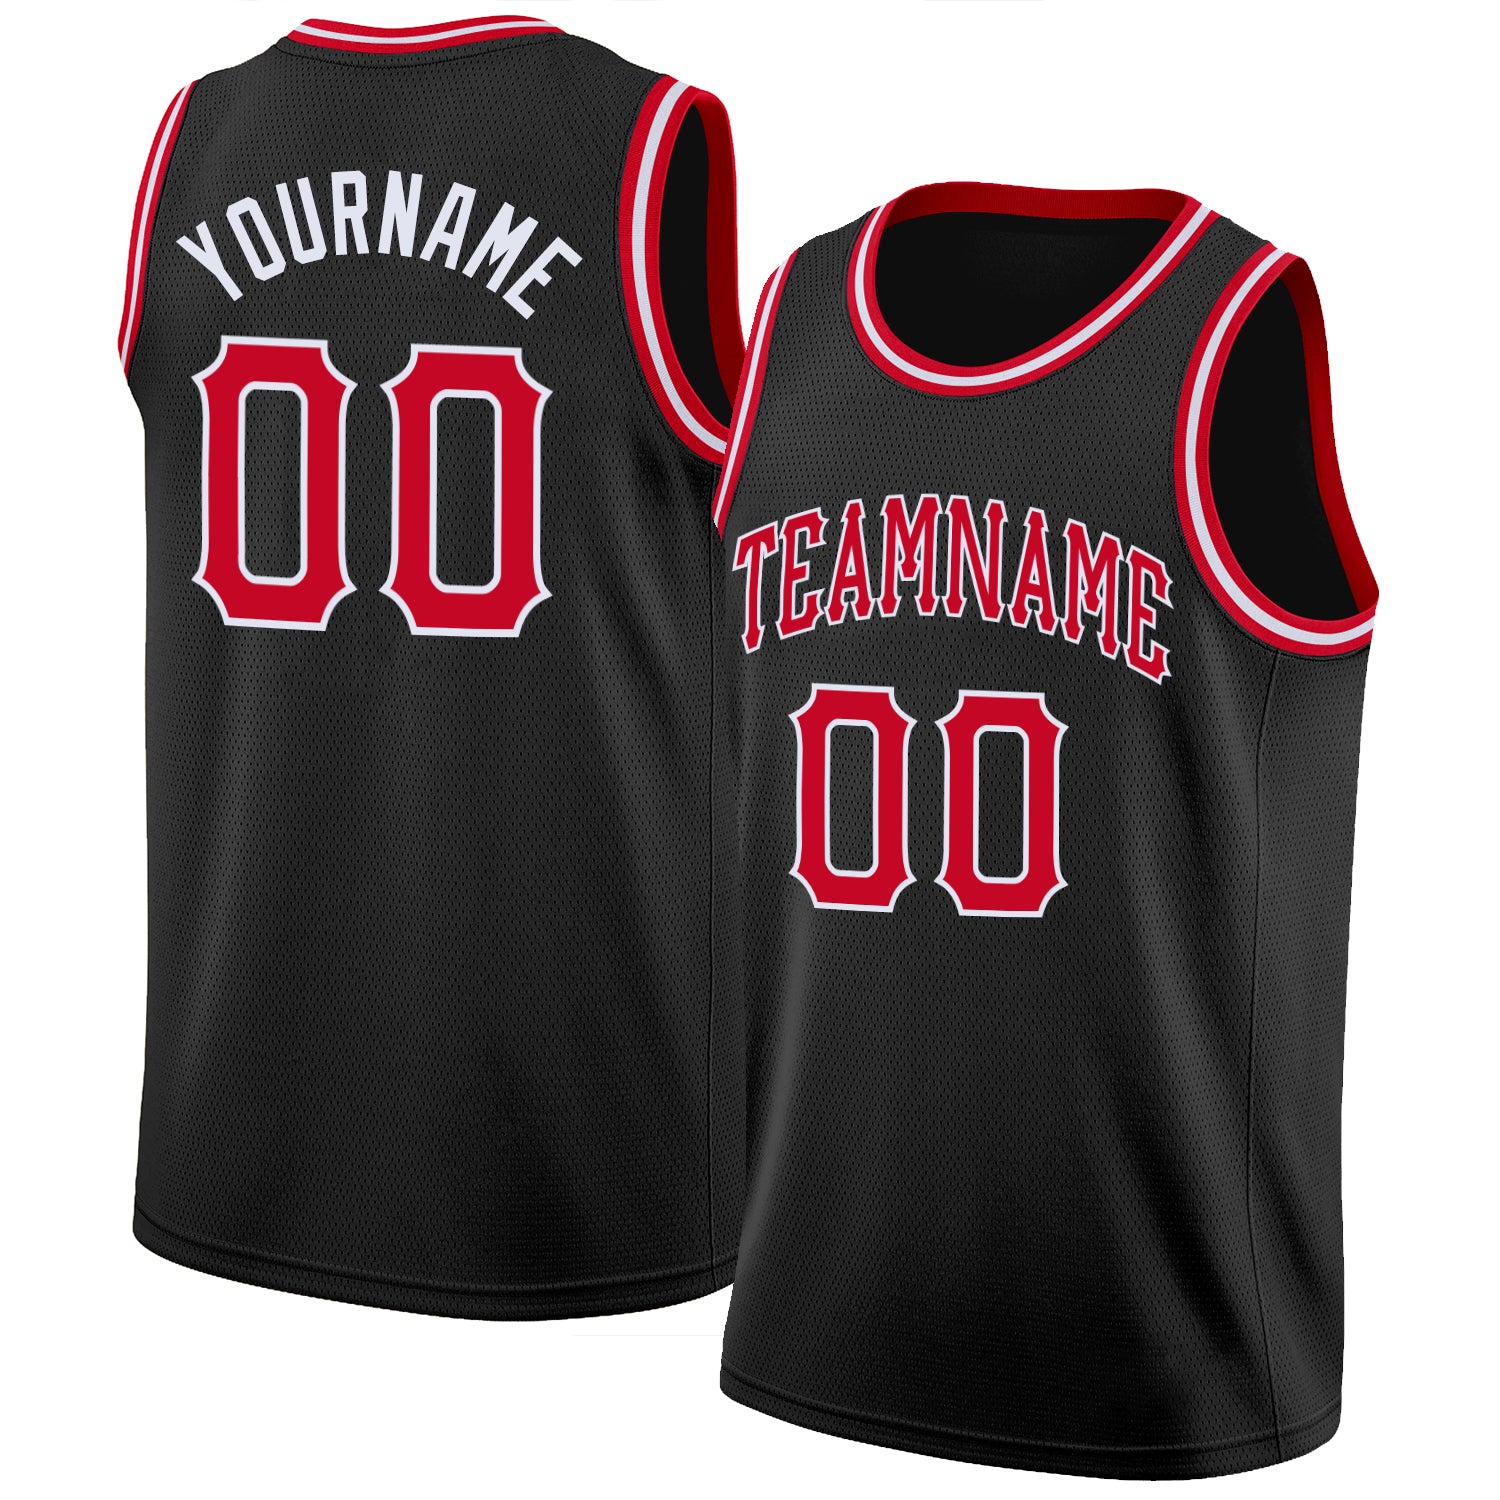 Red Black-White Custom Basketball Jersey – The Jersey Nation